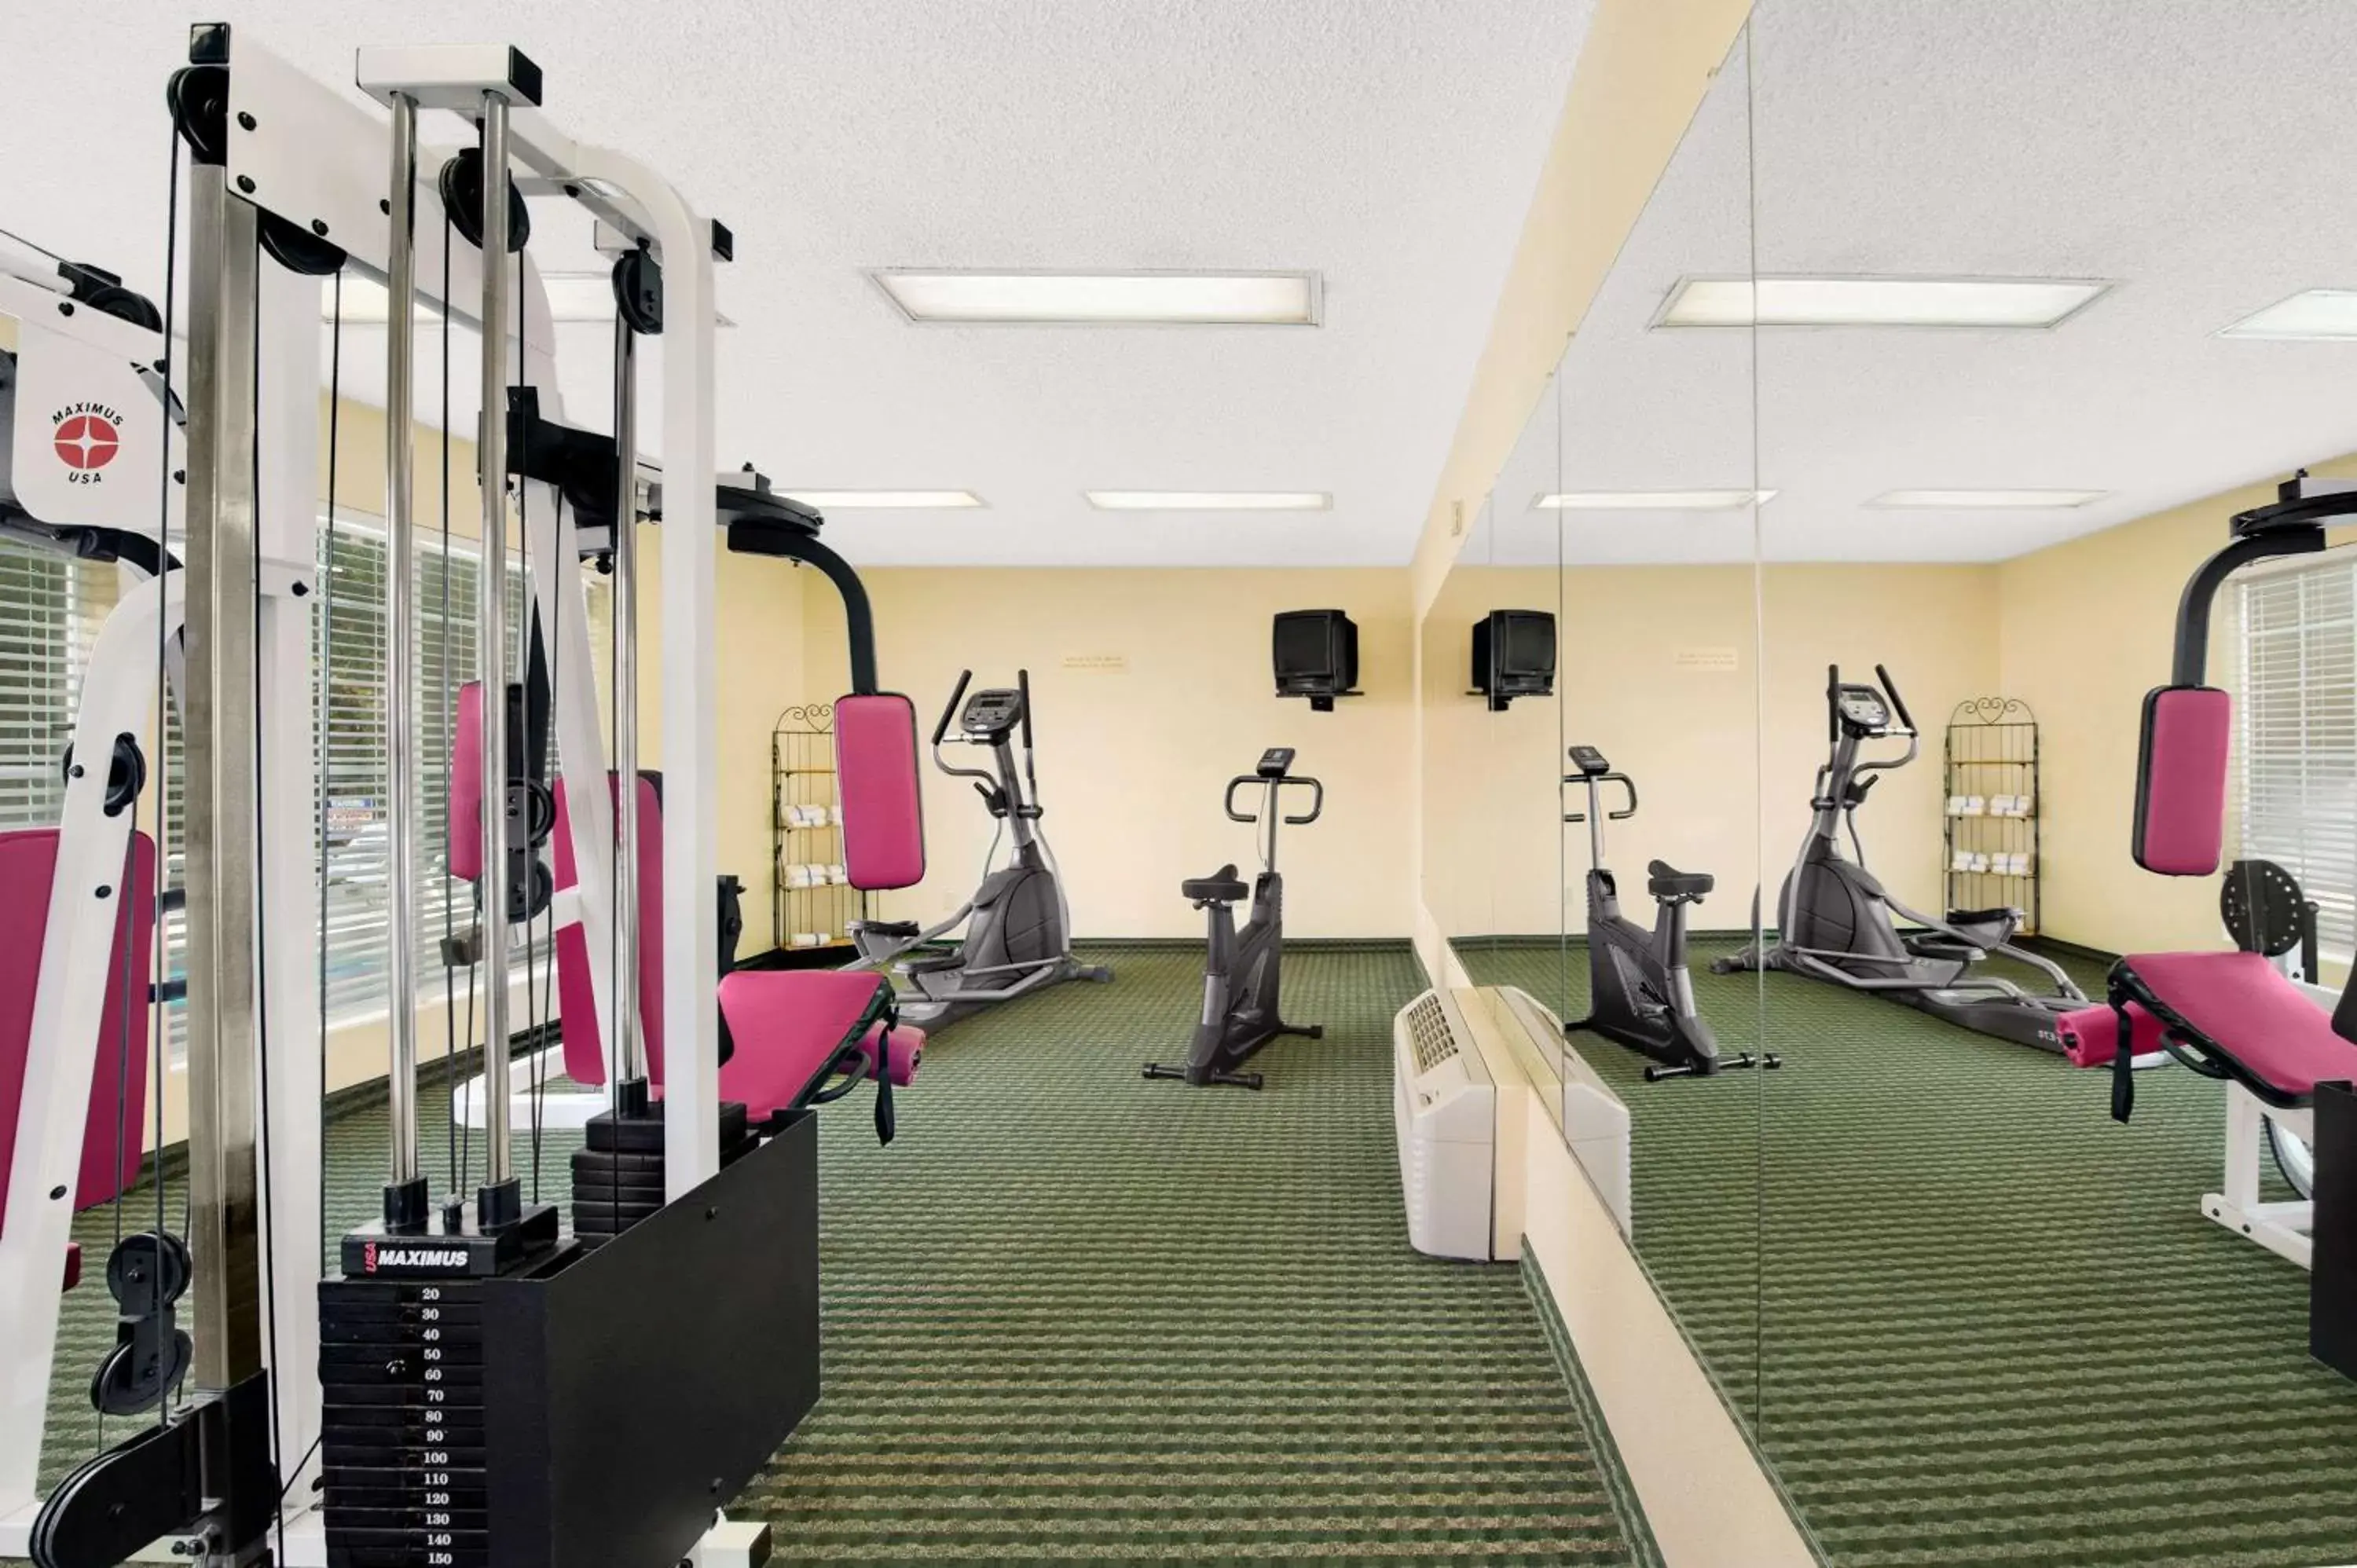 Fitness centre/facilities, Fitness Center/Facilities in Baymont by Wyndham Kingsland